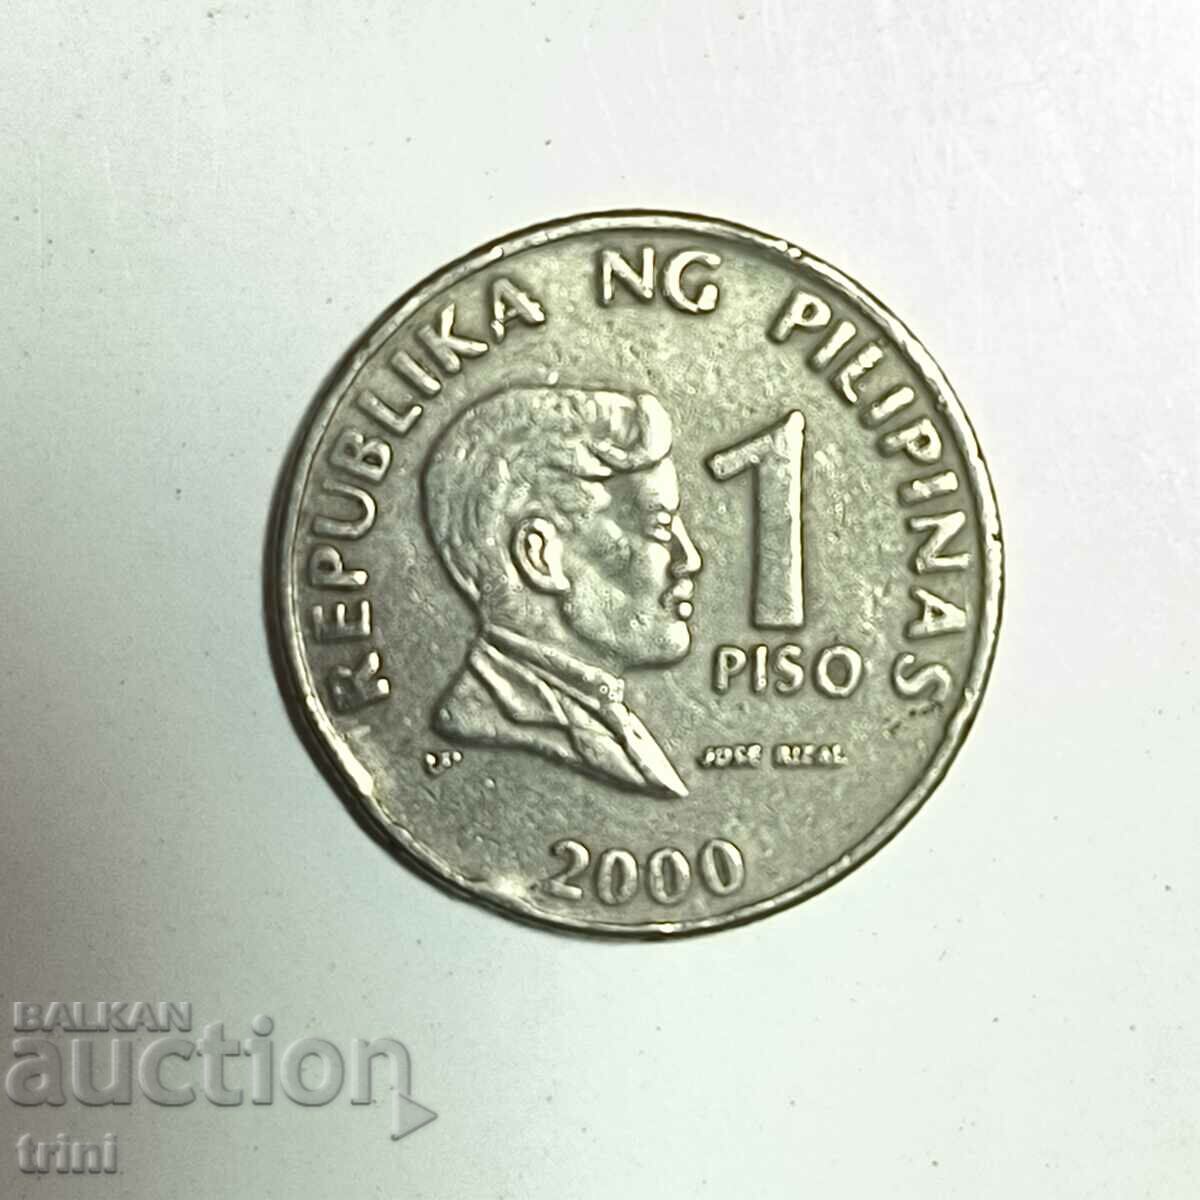 Philippines 1 piso 2000 year is 189